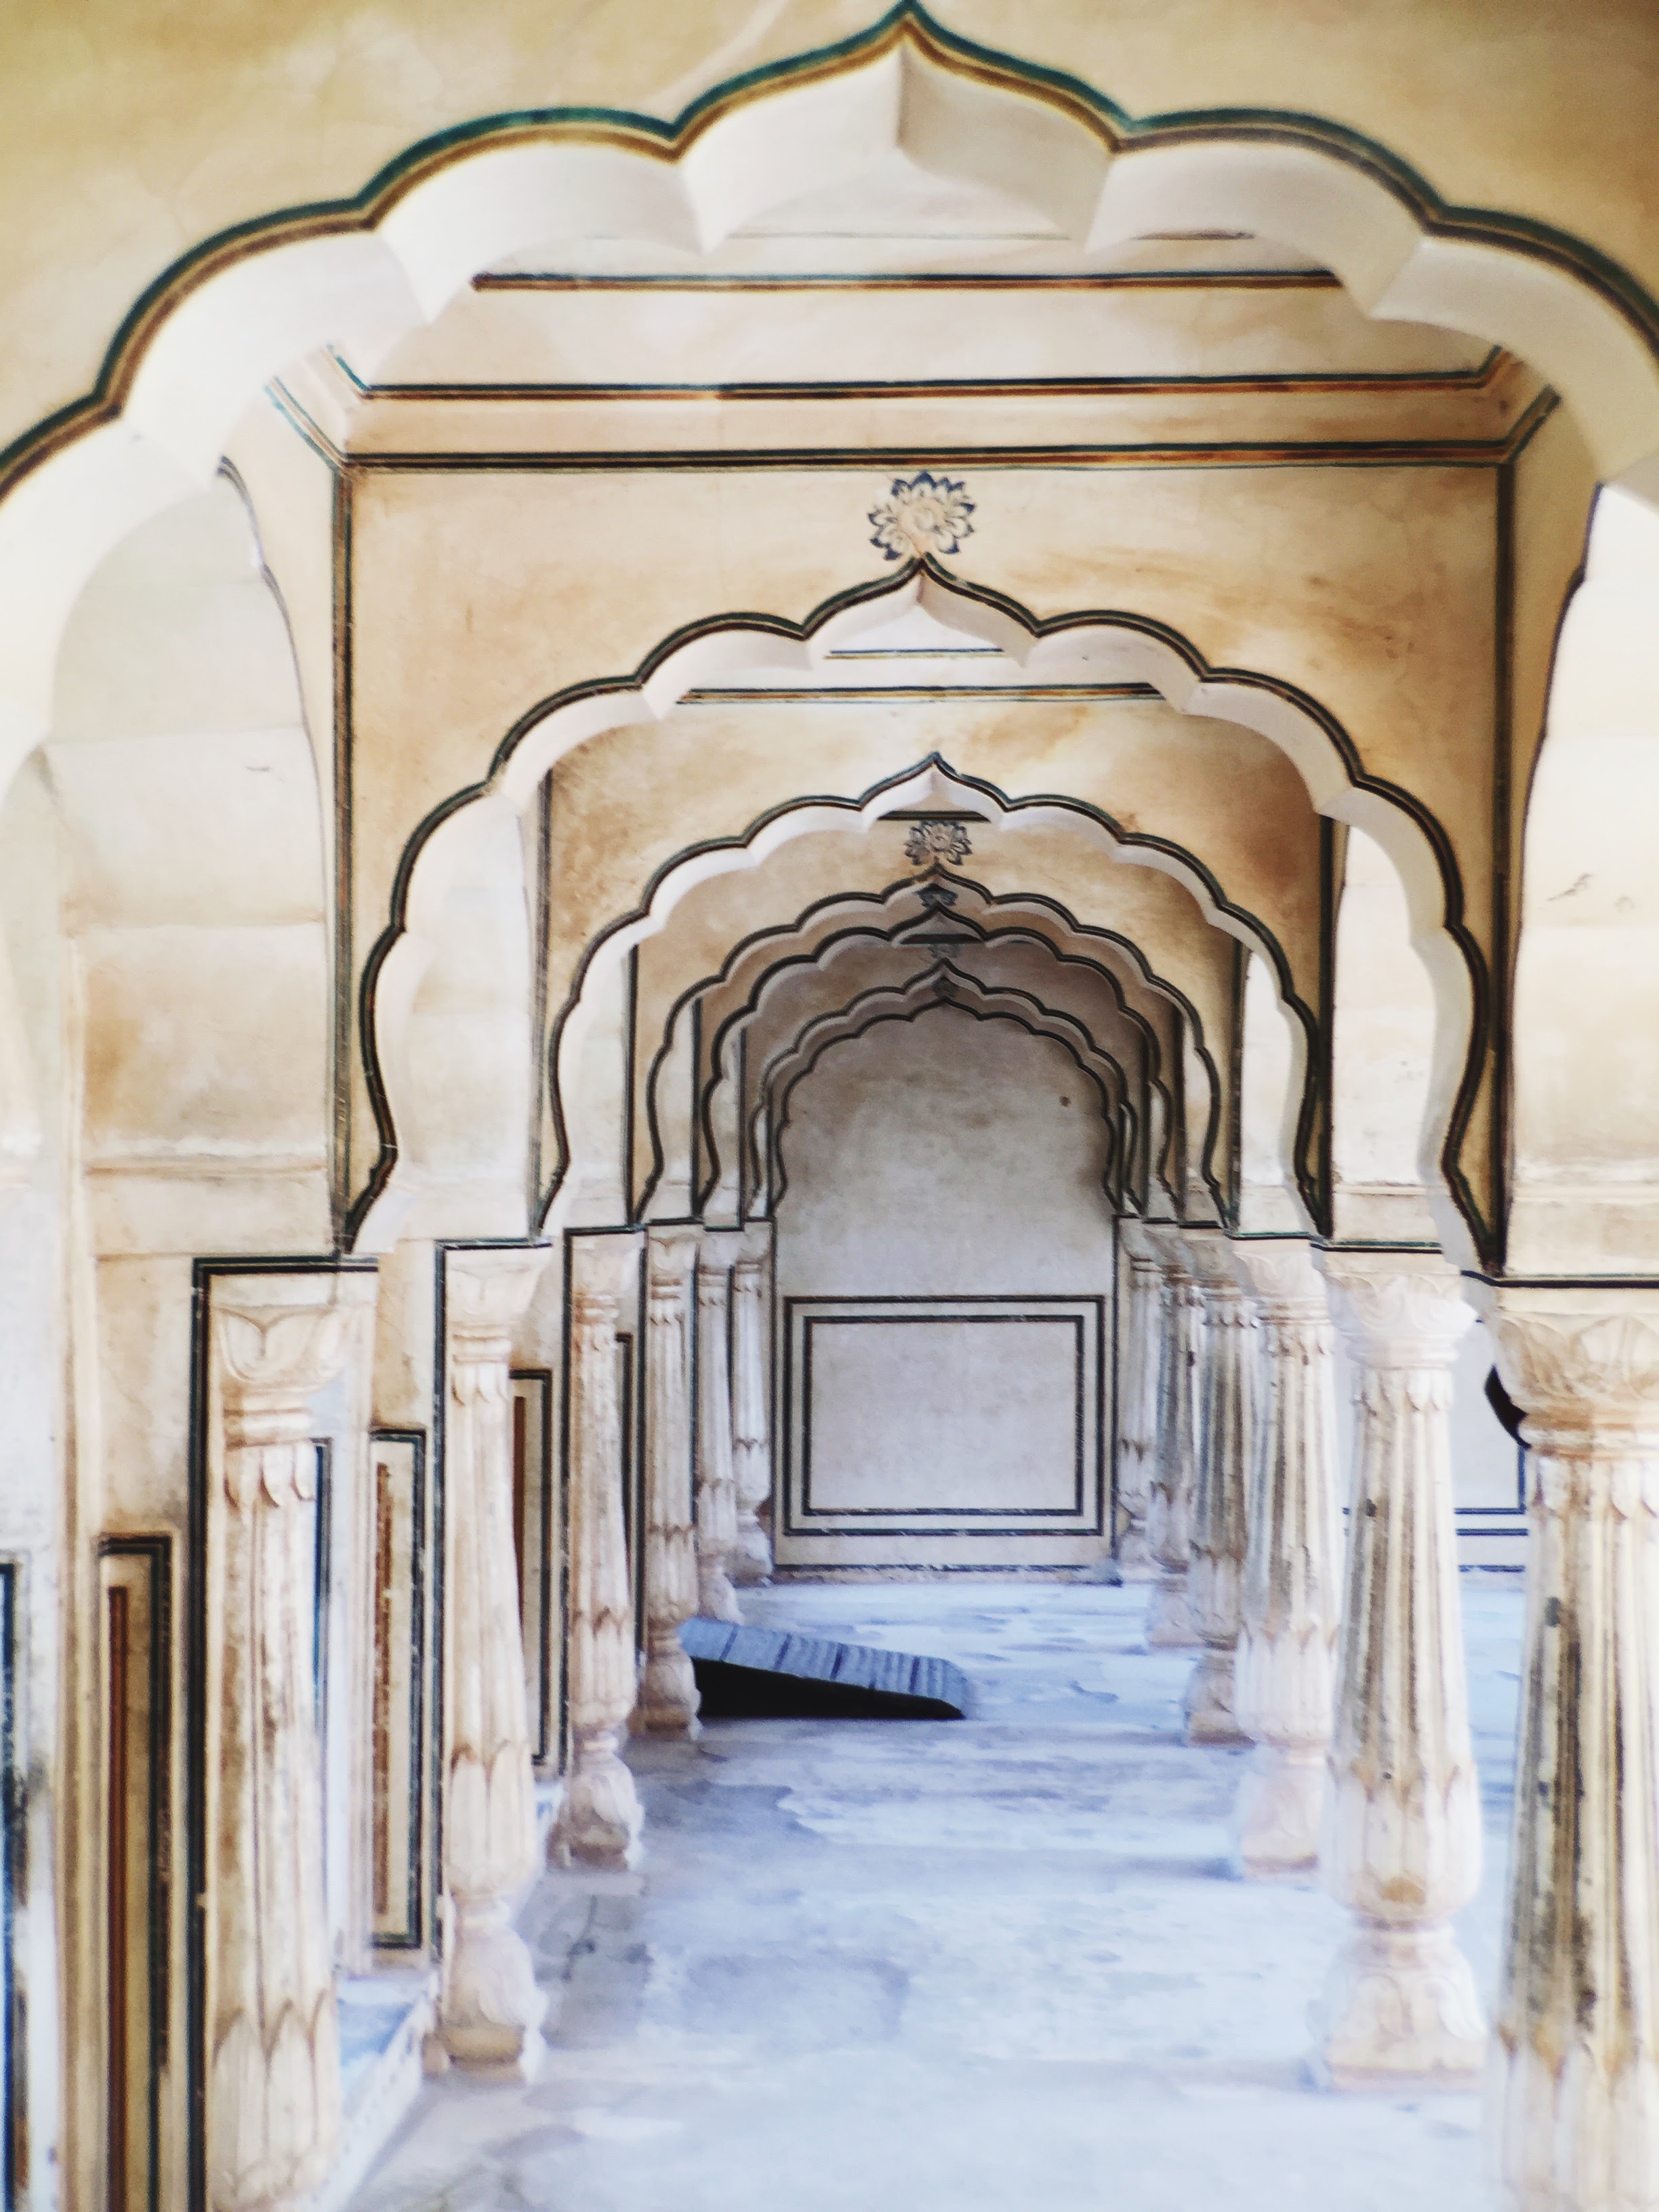 The McHowe World Tour - Amber Fort, Jaipur, India